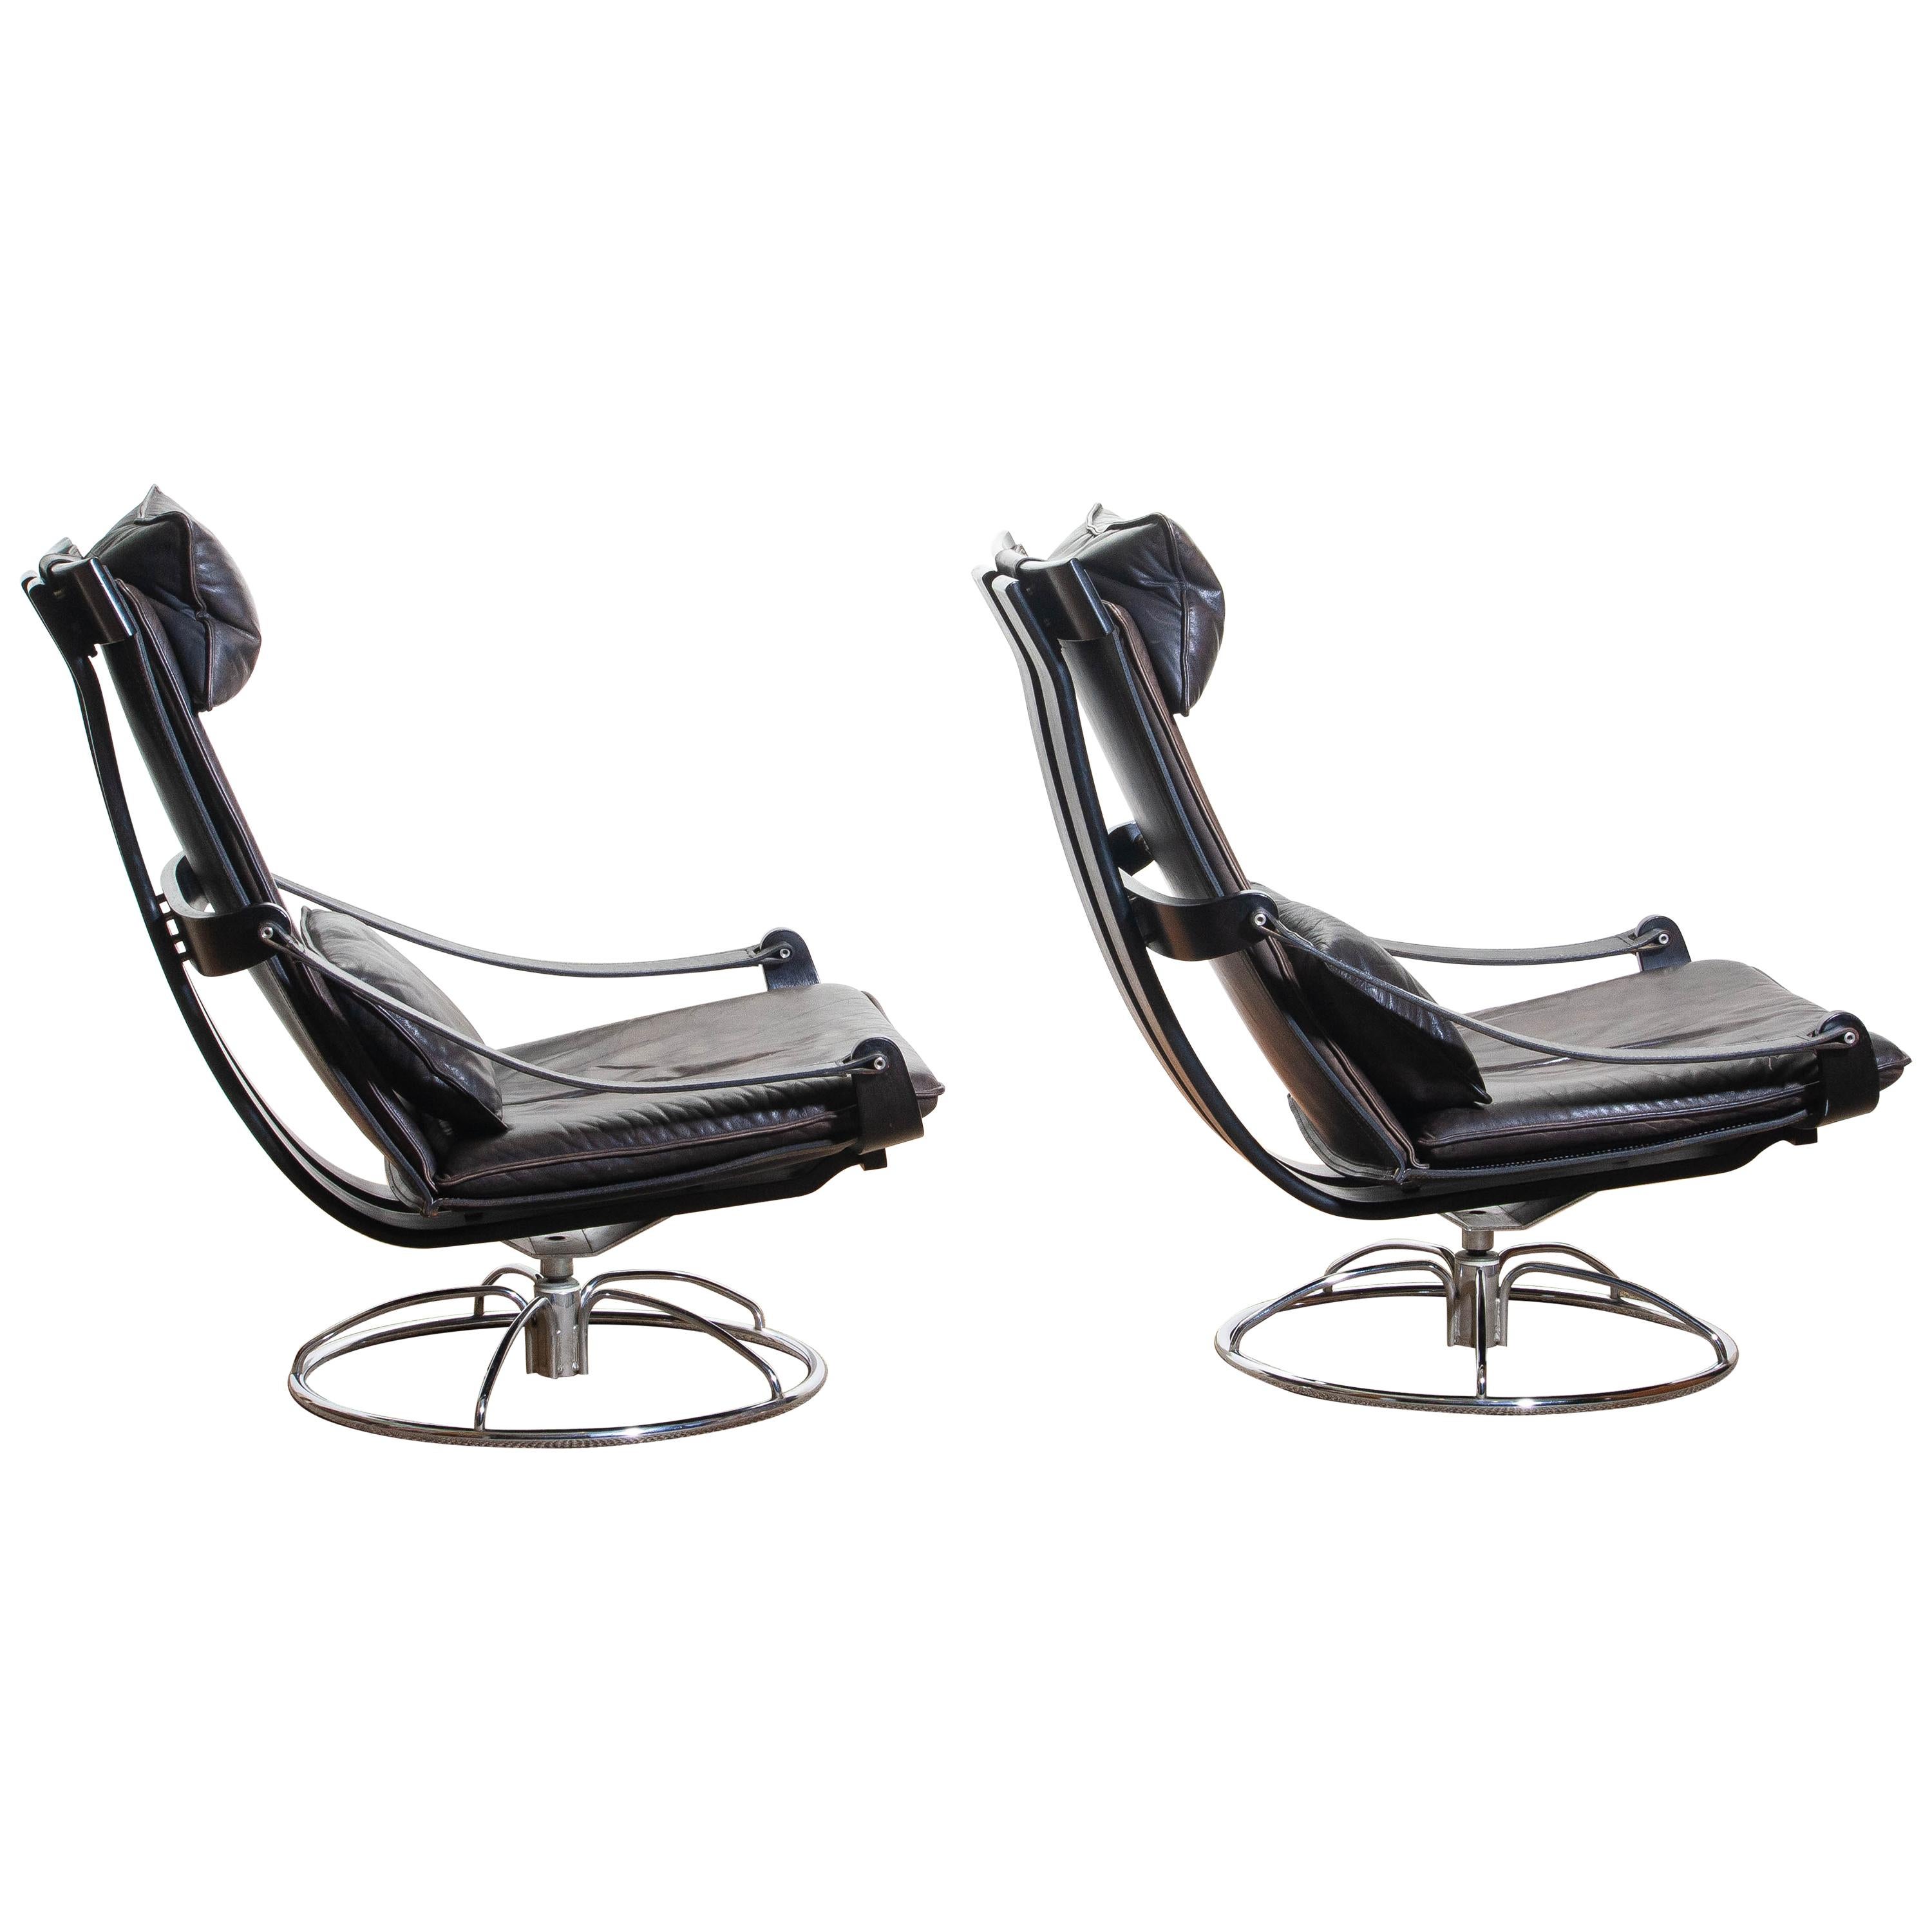 Scandinavian Modern 1970s, Pair of Artistic Leather Swivel Chairs by Ake Fribytter for Nelo, Sweden